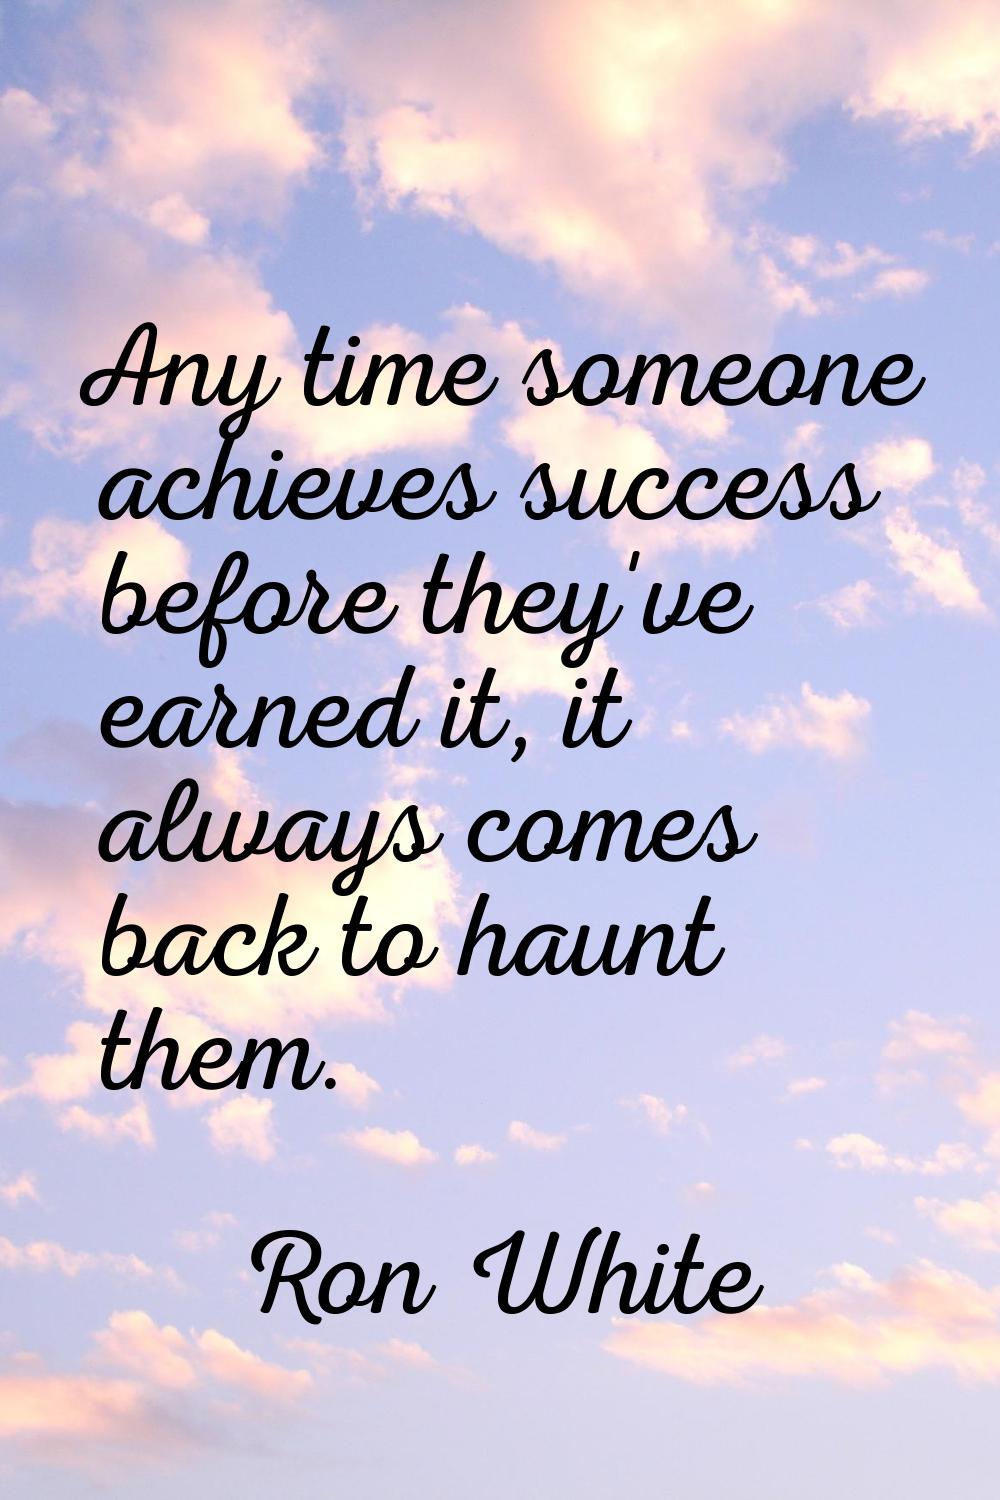 Any time someone achieves success before they've earned it, it always comes back to haunt them.